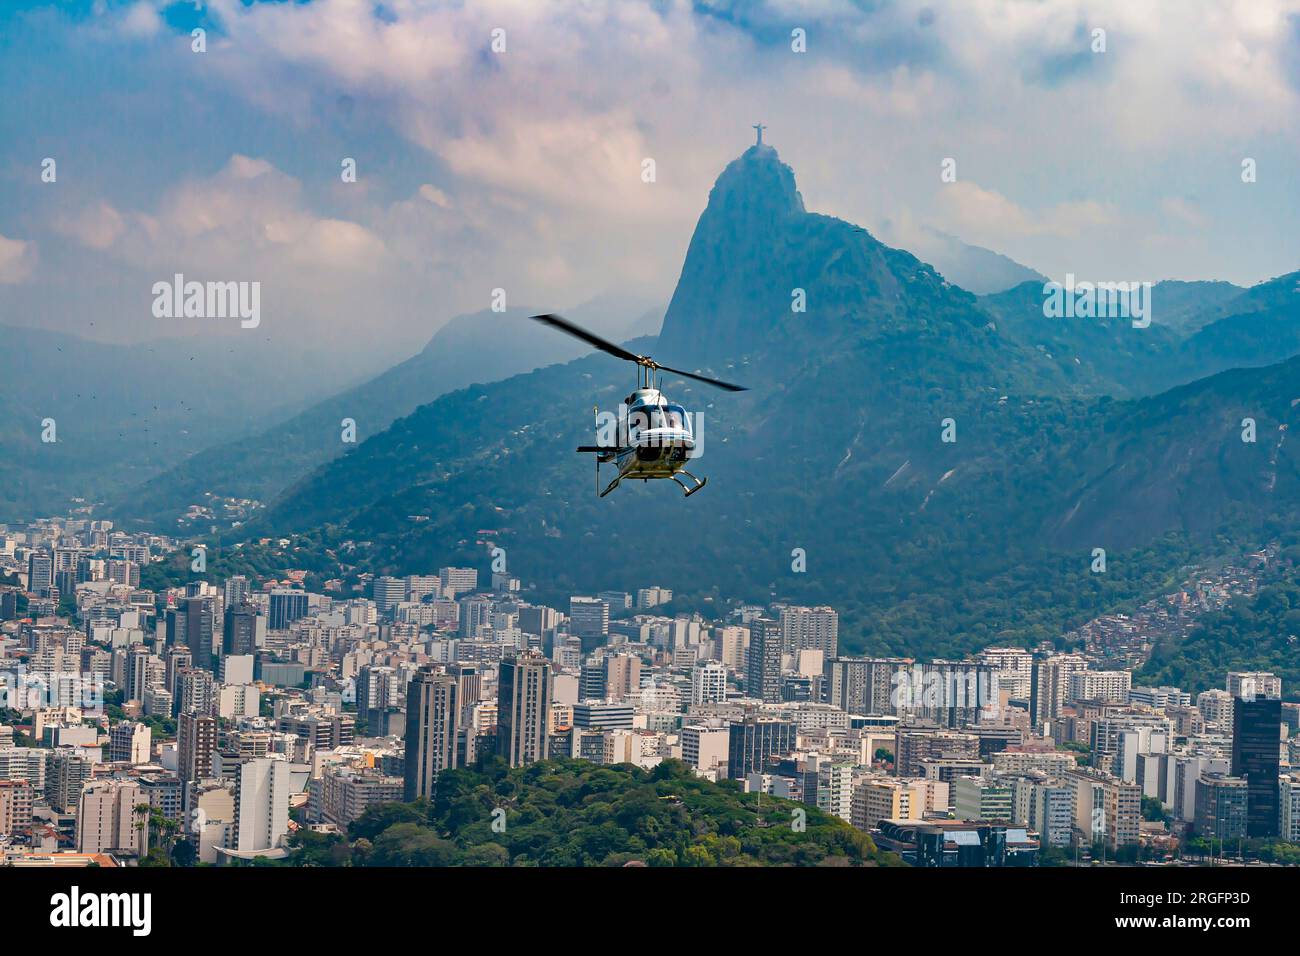 Panoramic view of the city and beaches from the observation deck on Sugarloaf Mountain in Rio de Janeiro with helicopter in flight during the day Stock Photo